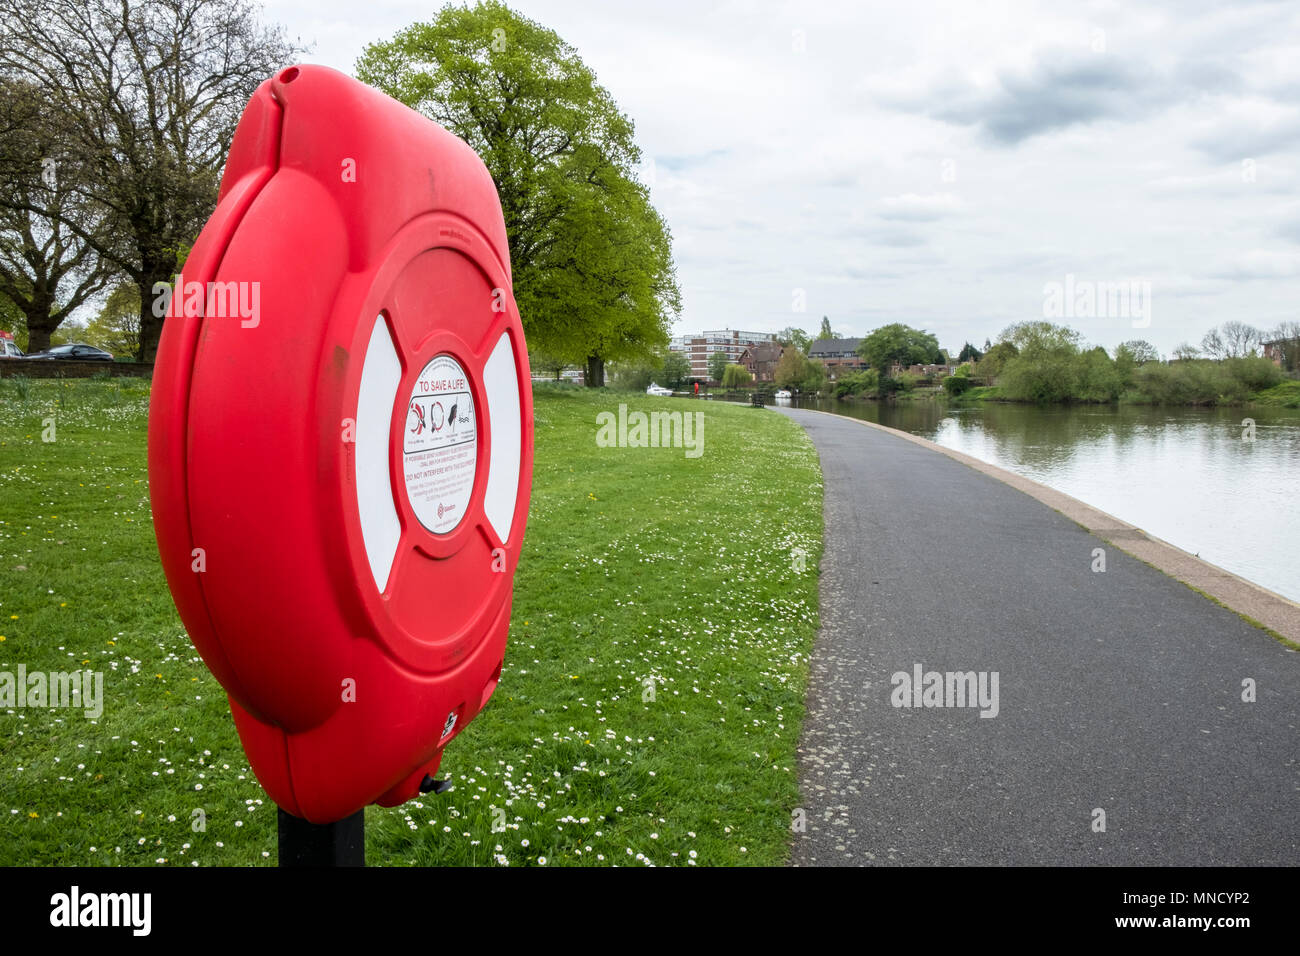 Life buoy or lifebuoy, also known as a life preserver, lifesaver, or life belt next to a riverside path. River Trent, Nottingham, England, UK Stock Photo